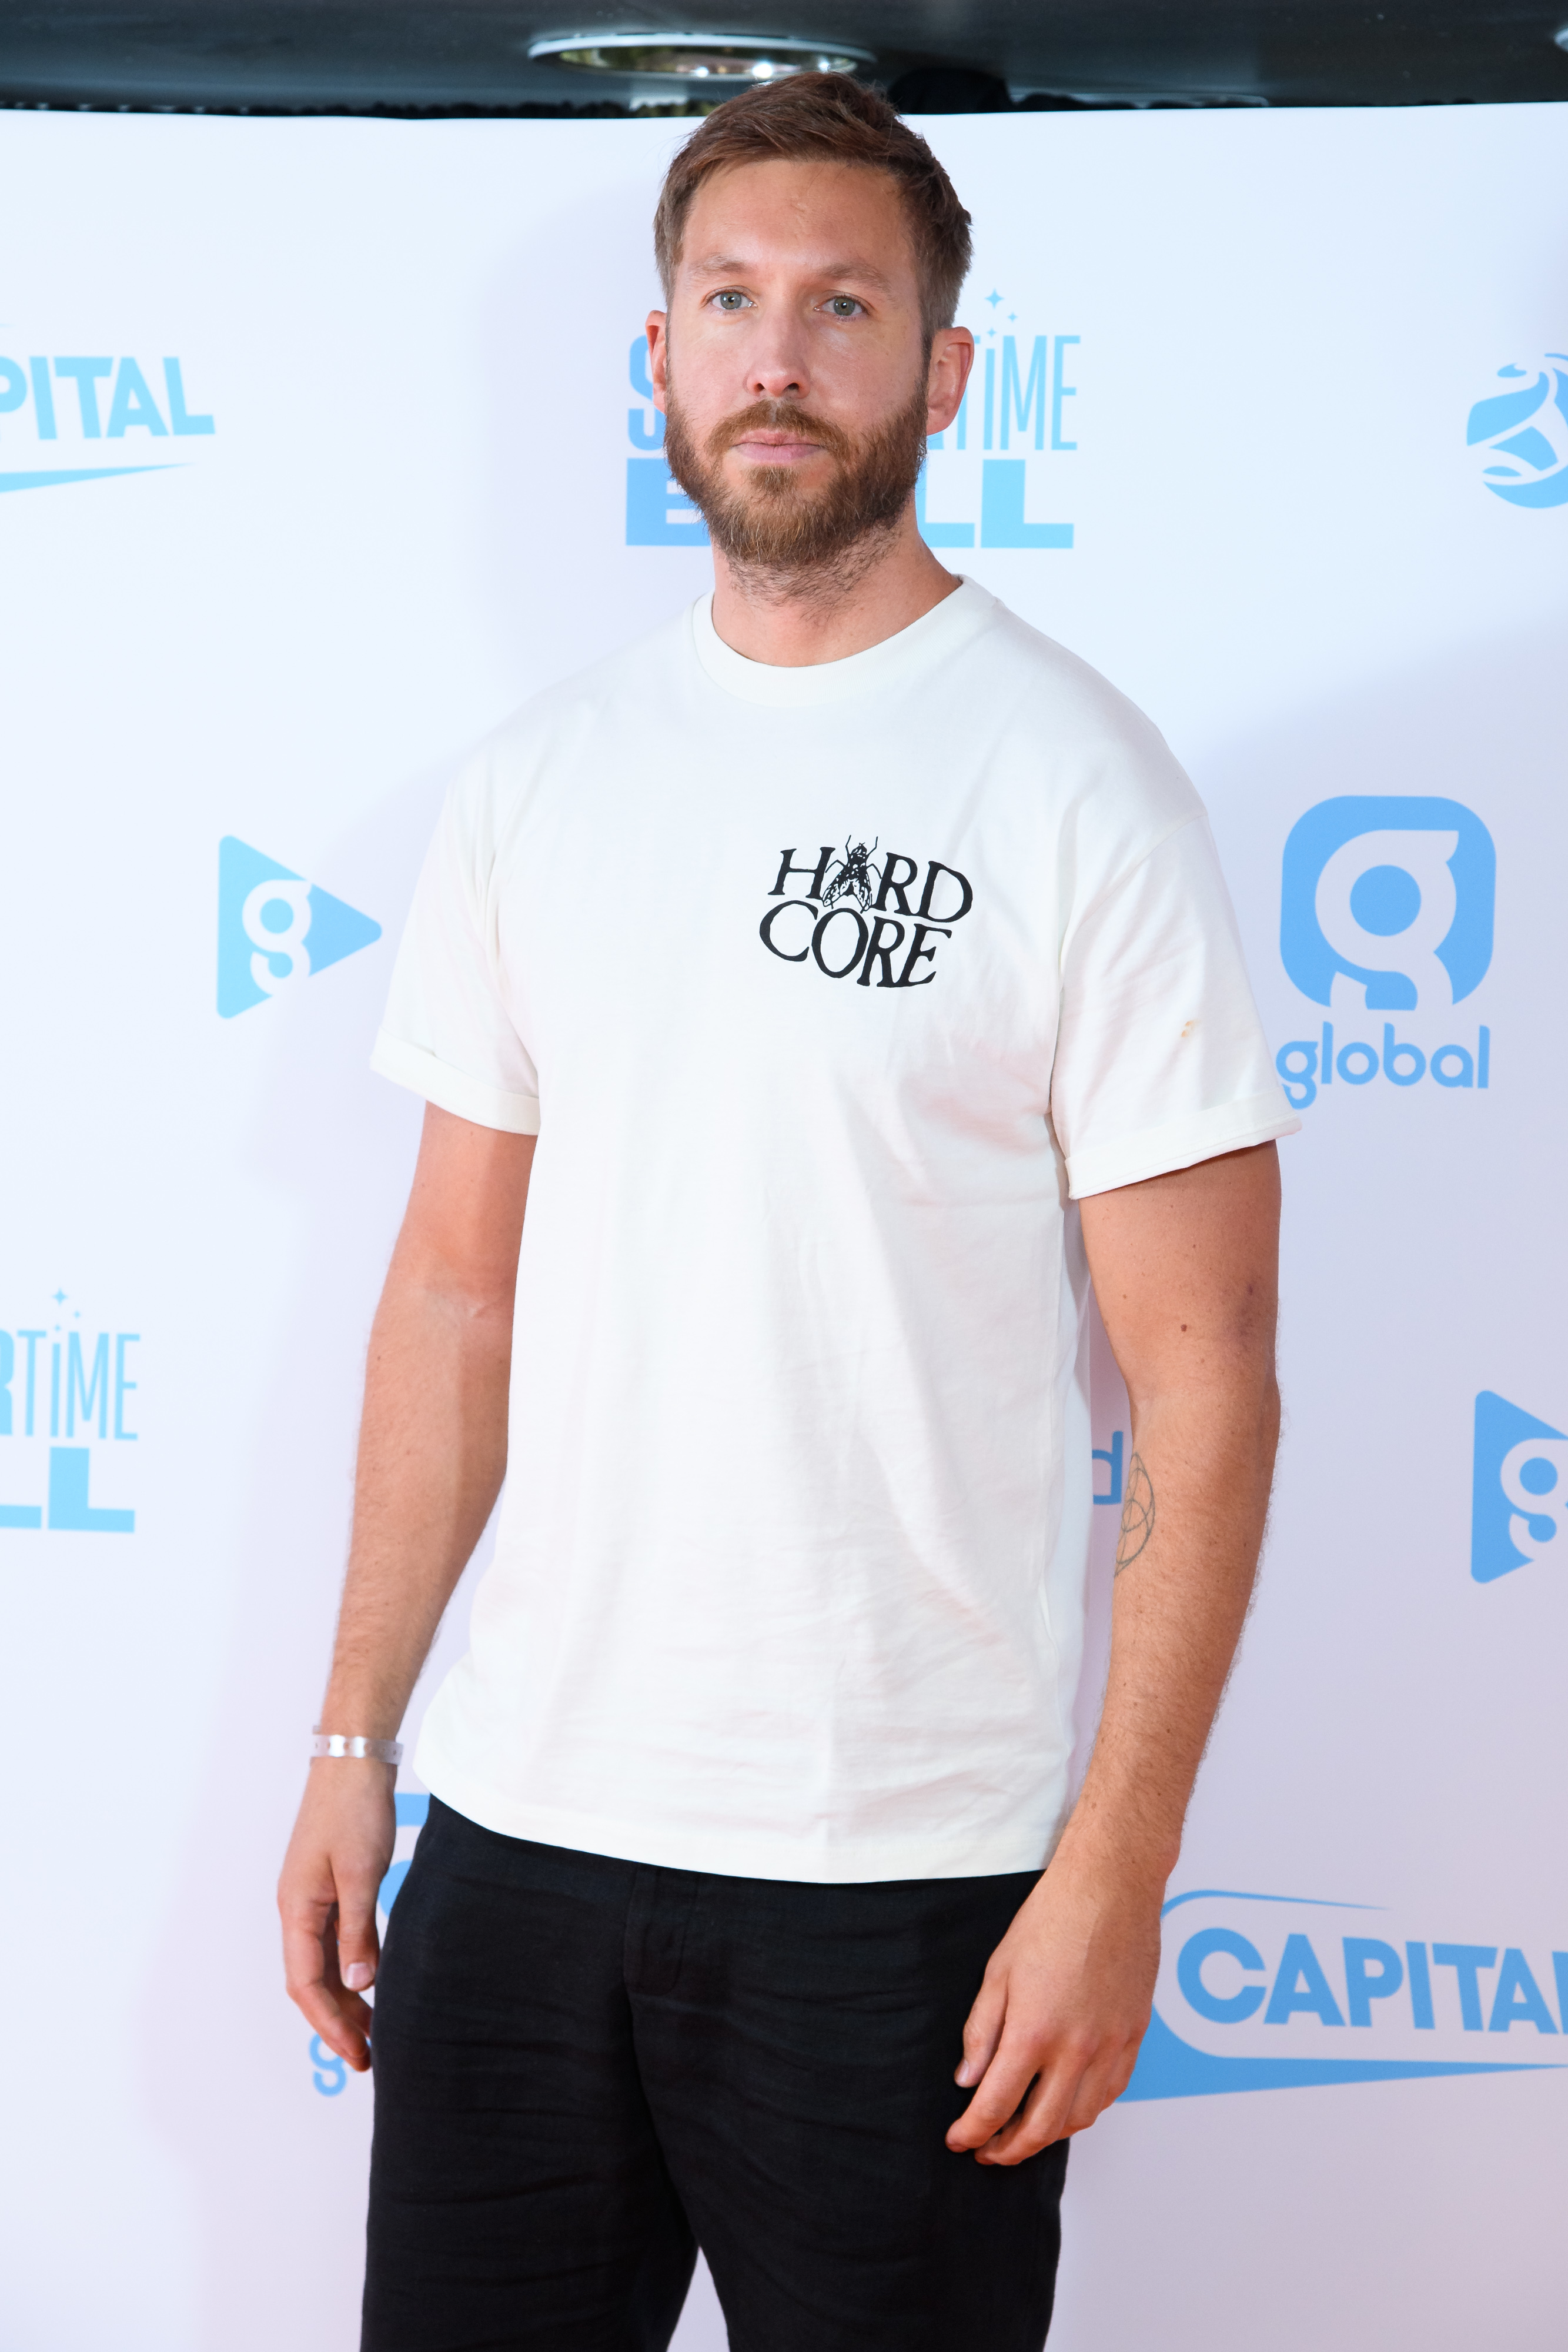 Close-up of Calvin at a media event wearing a short-sleeved T-shirt and pants